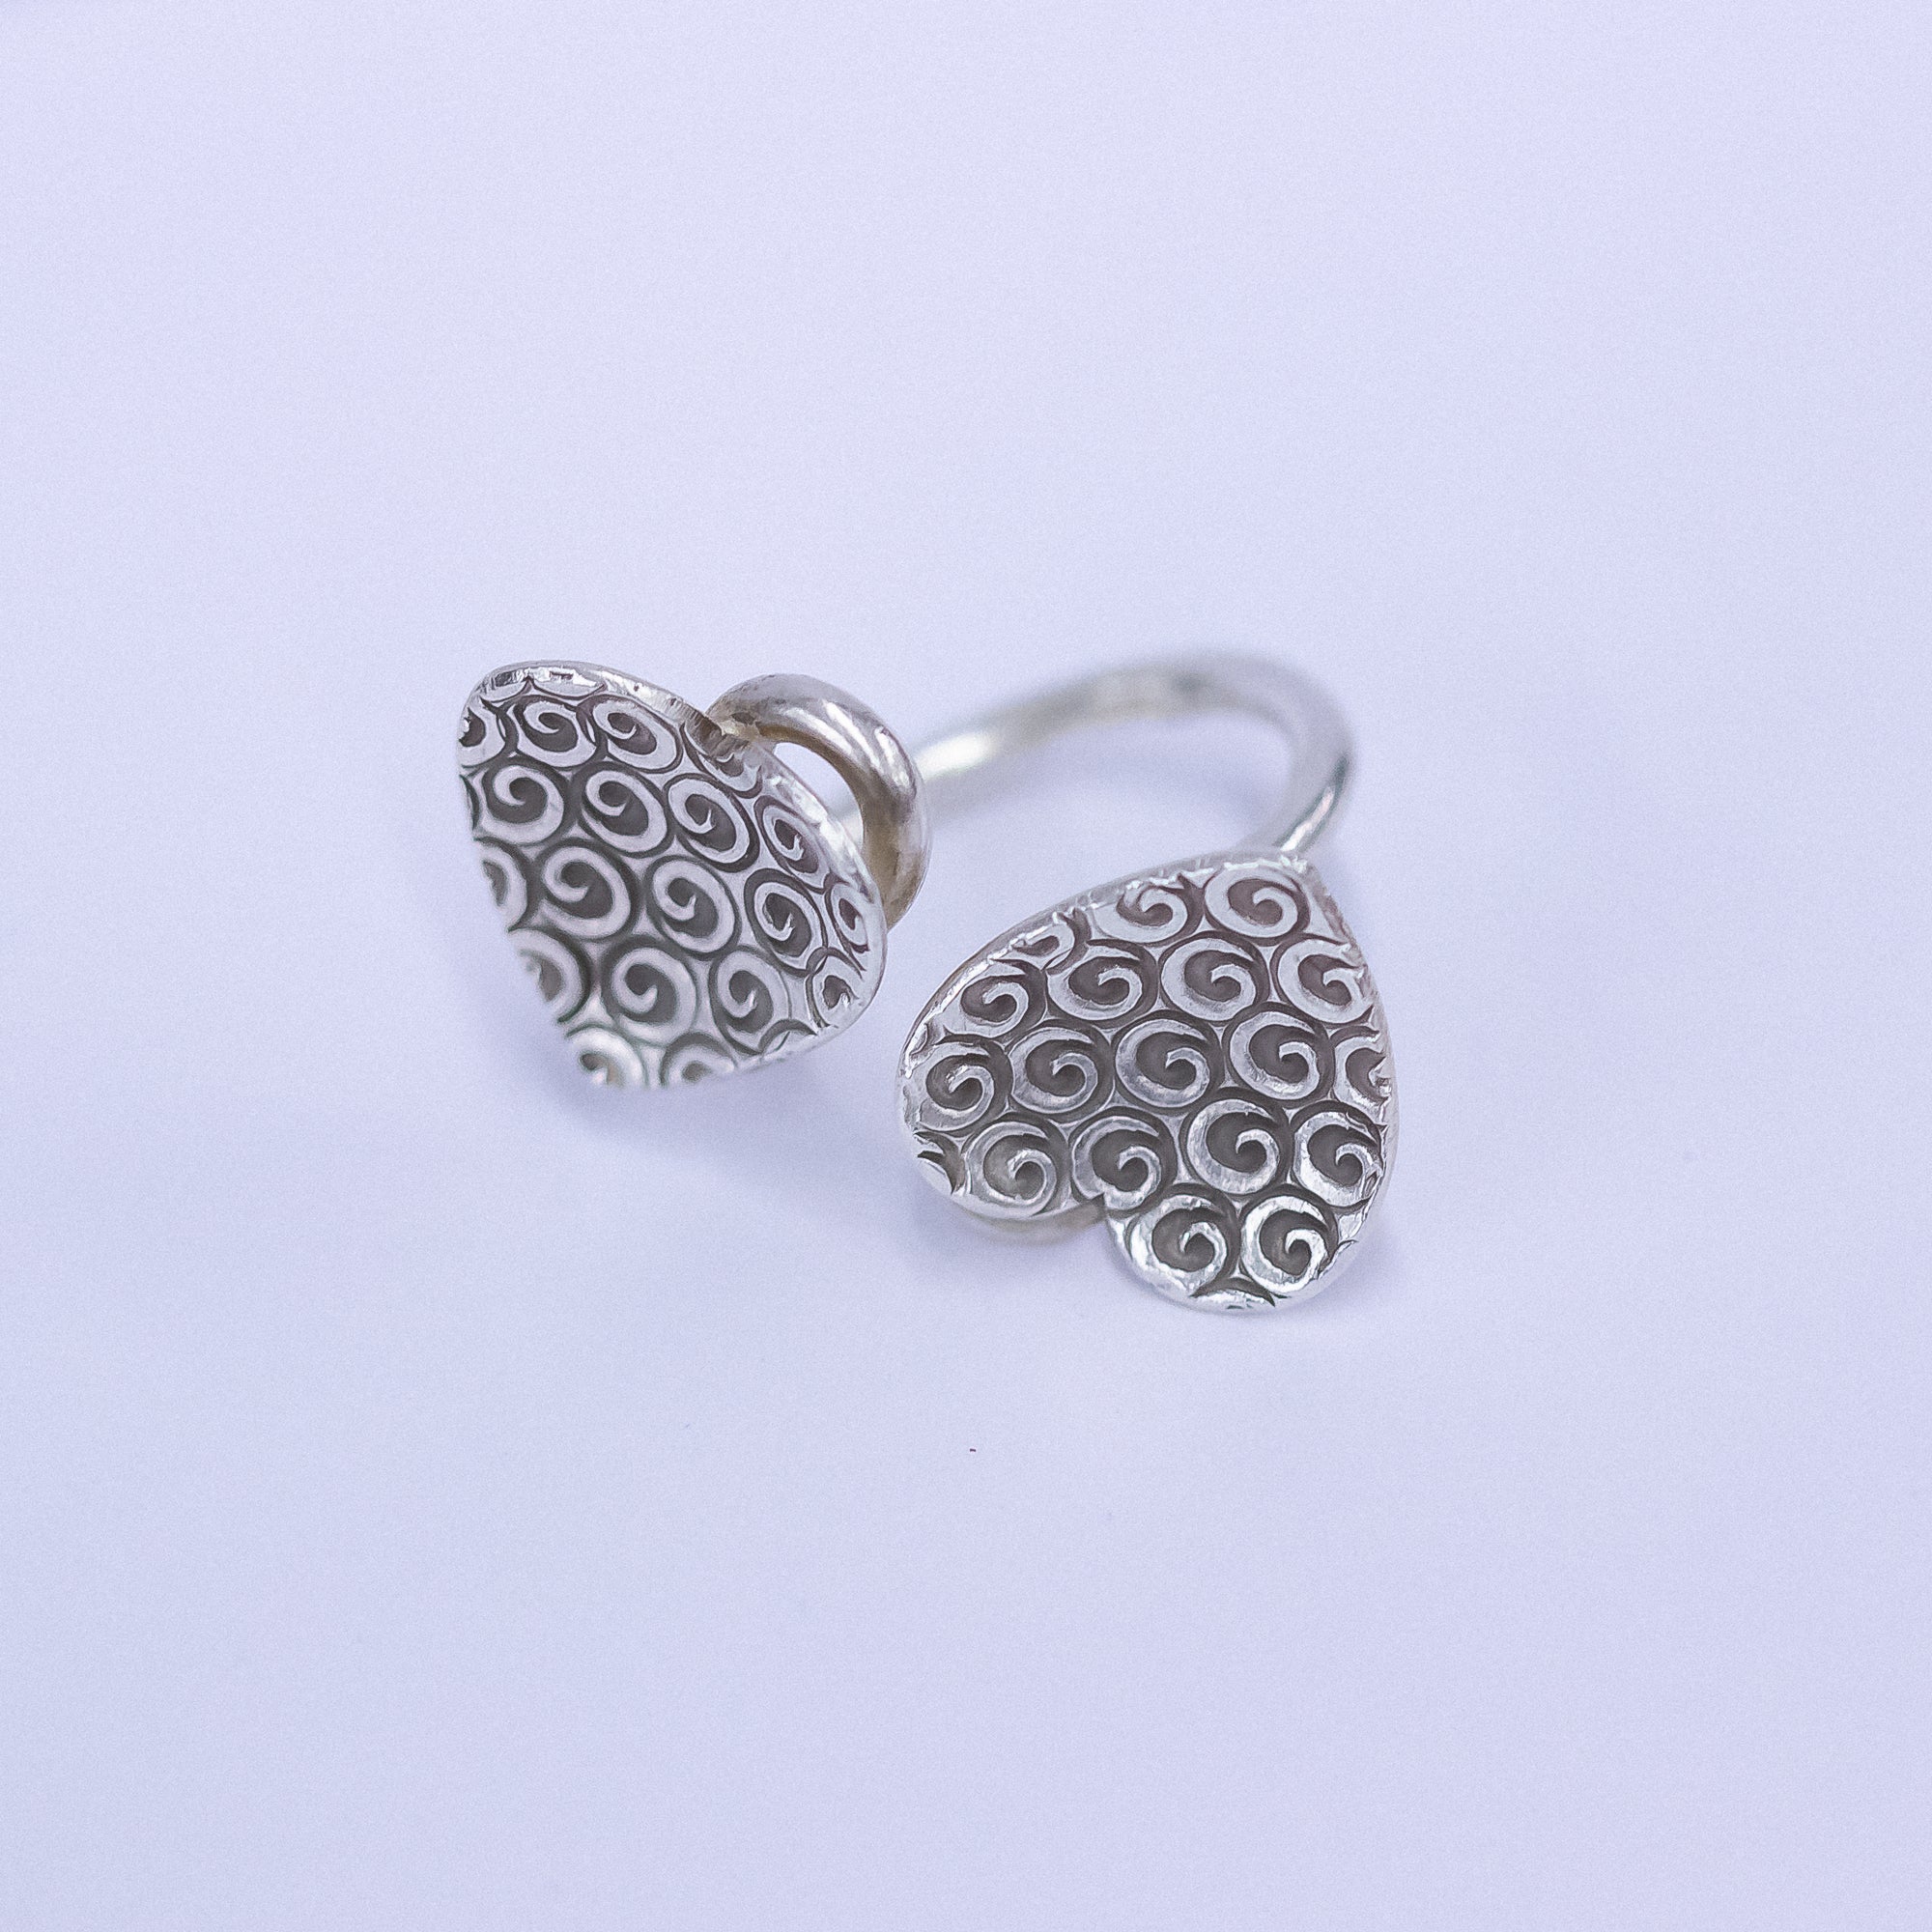 Handmade Silver Intertwined Hearts Ring